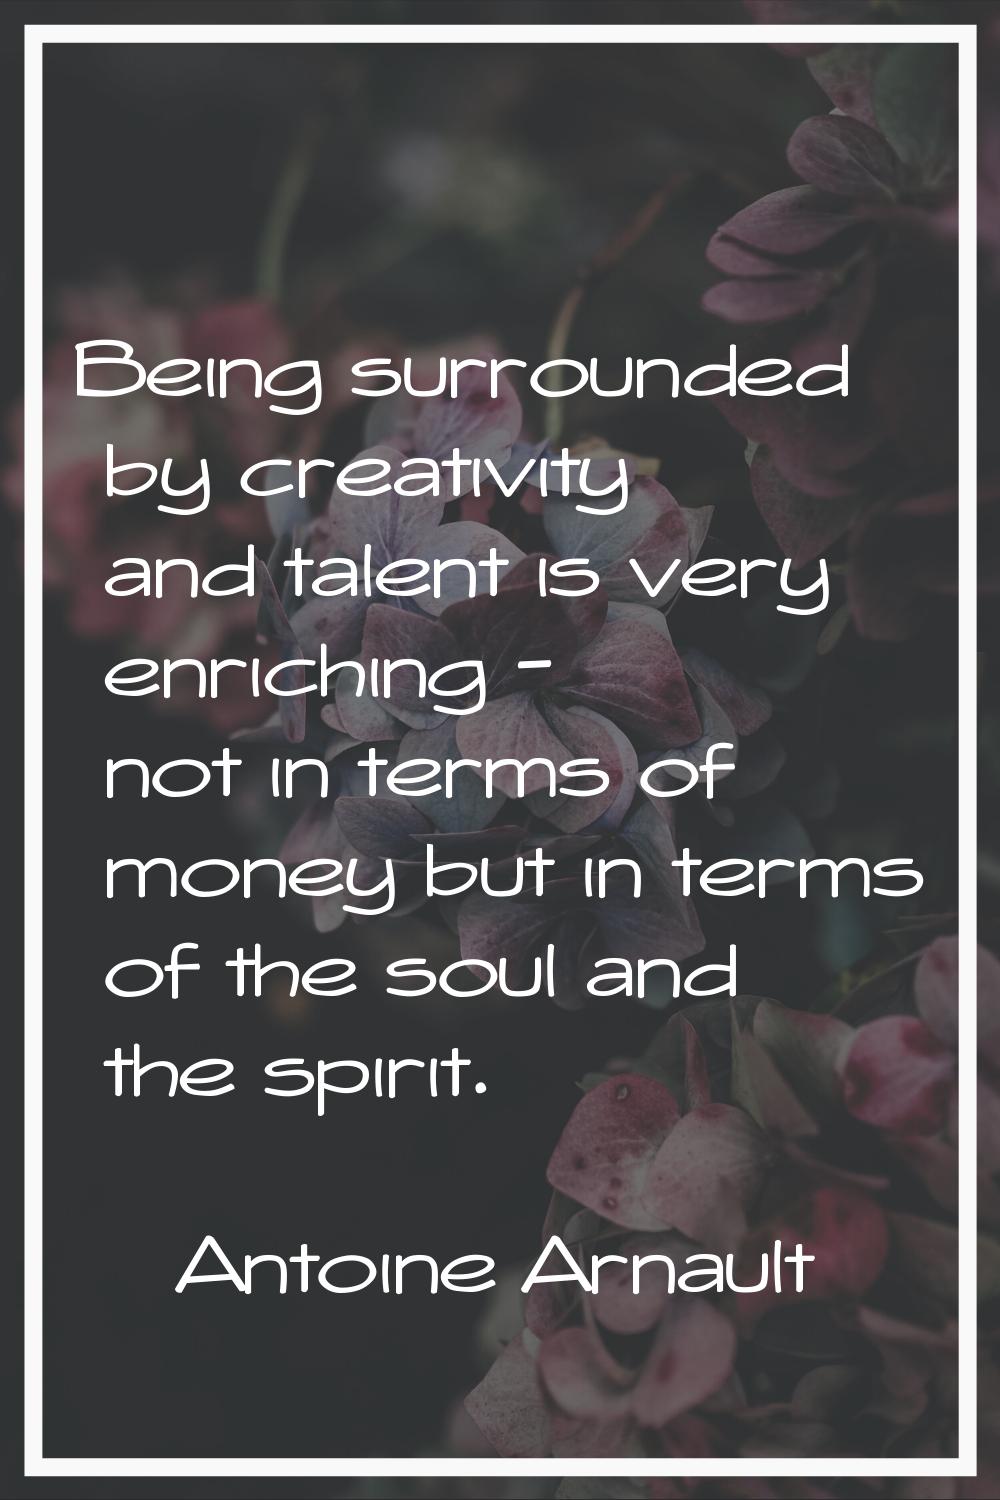 Being surrounded by creativity and talent is very enriching - not in terms of money but in terms of